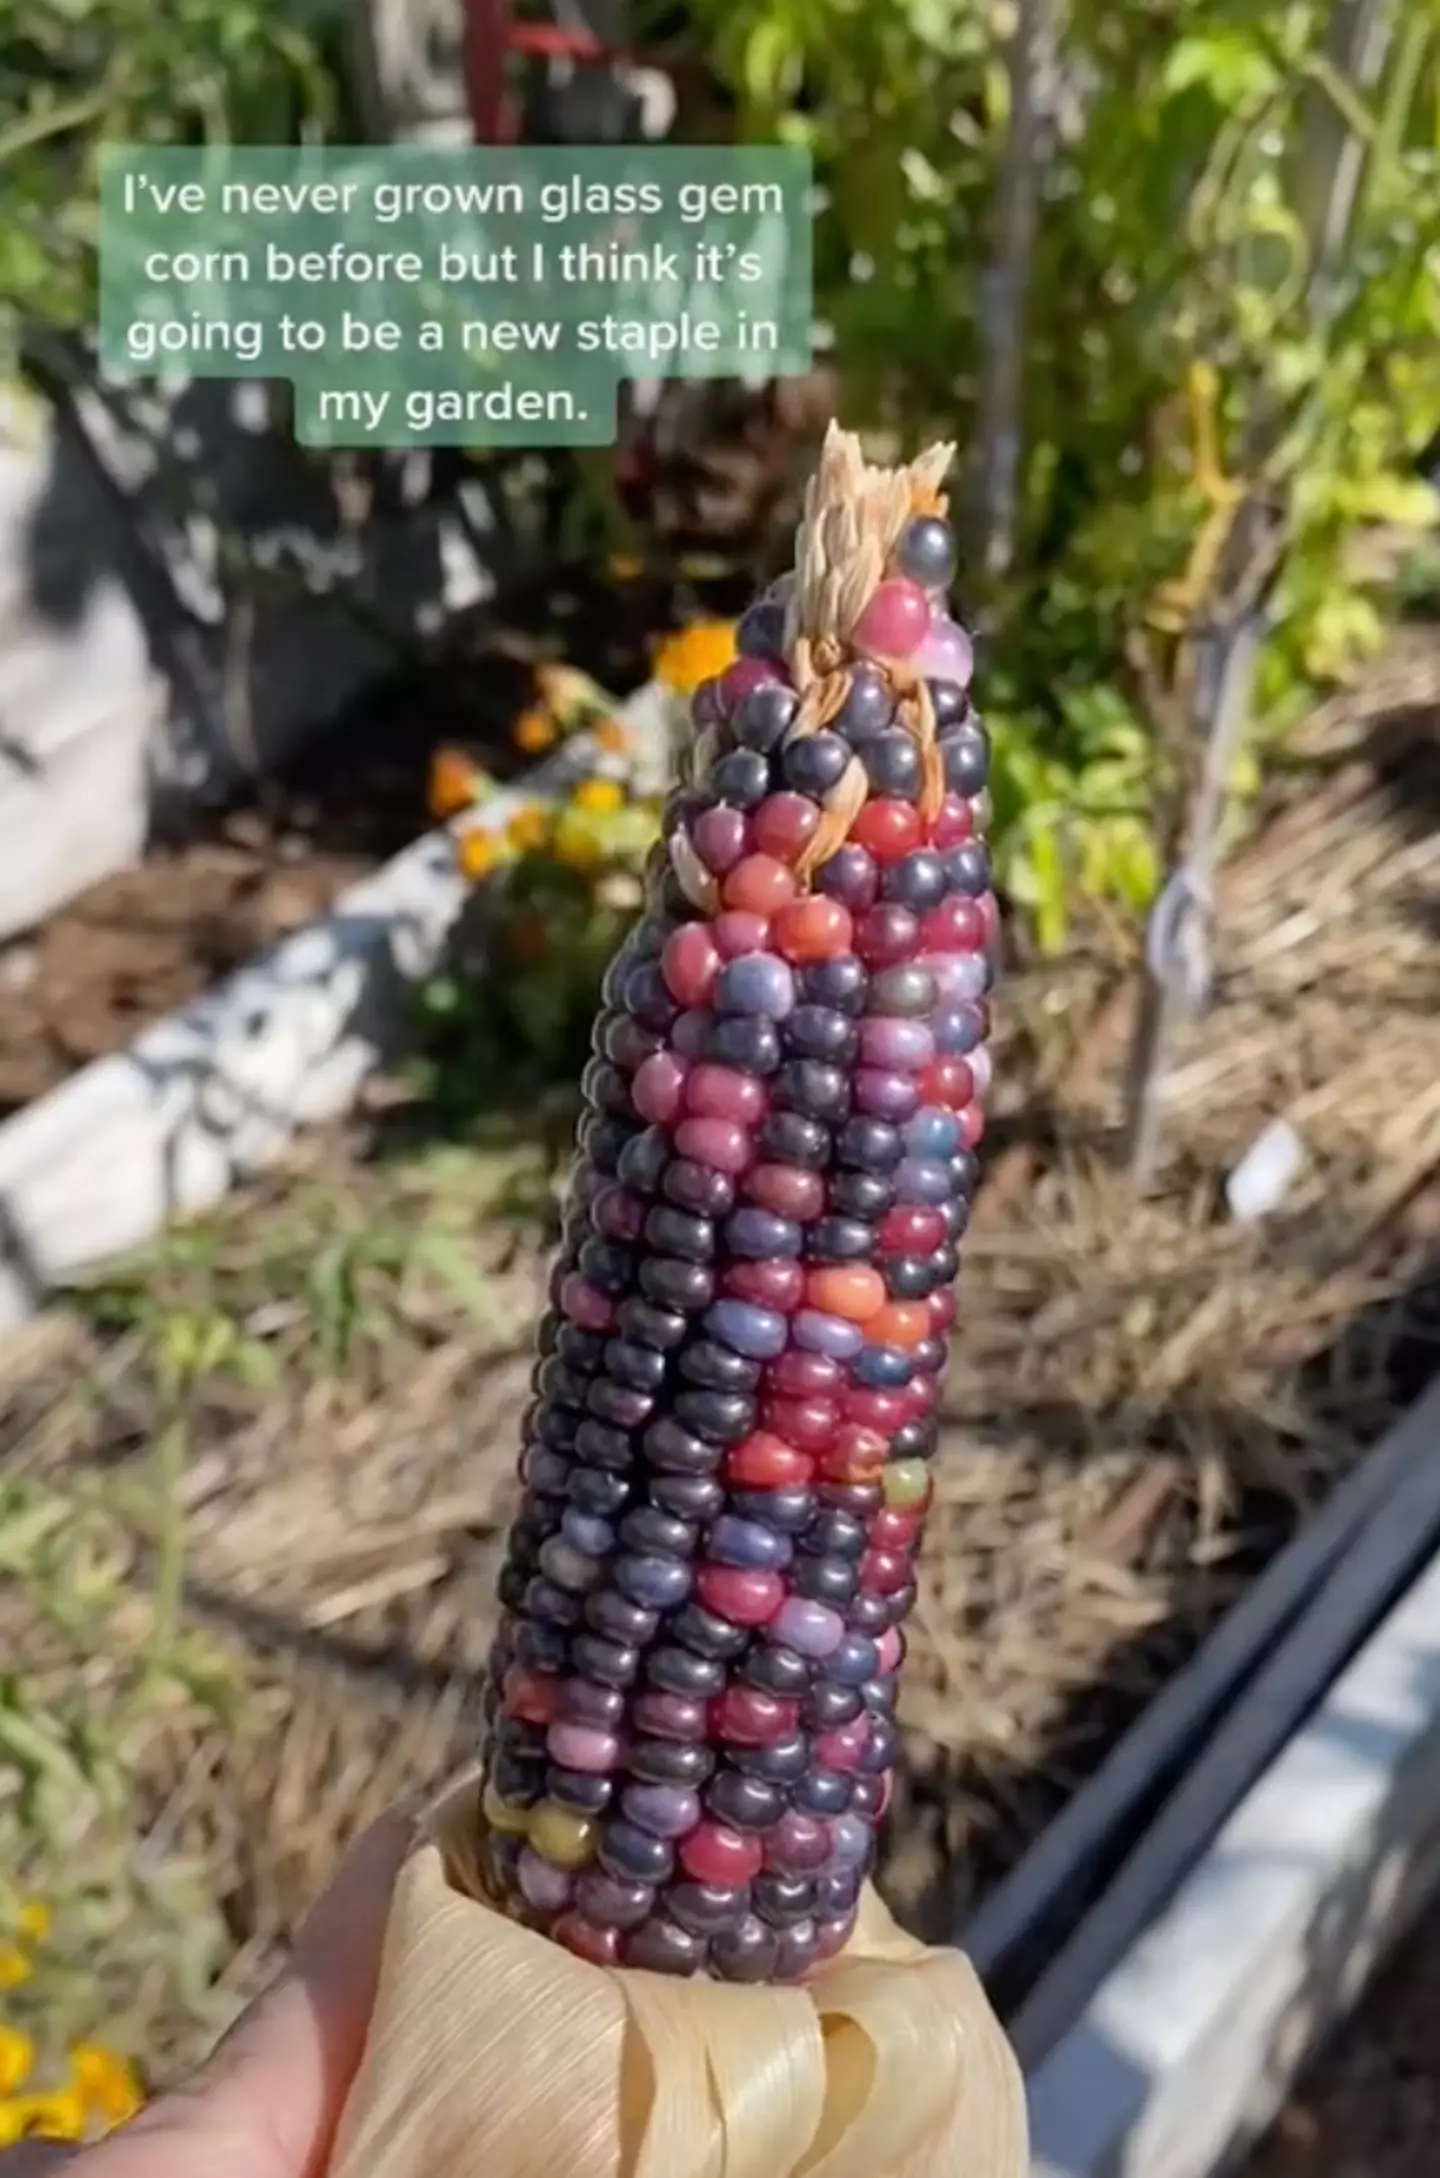 People are obsessed with the colourful corn (